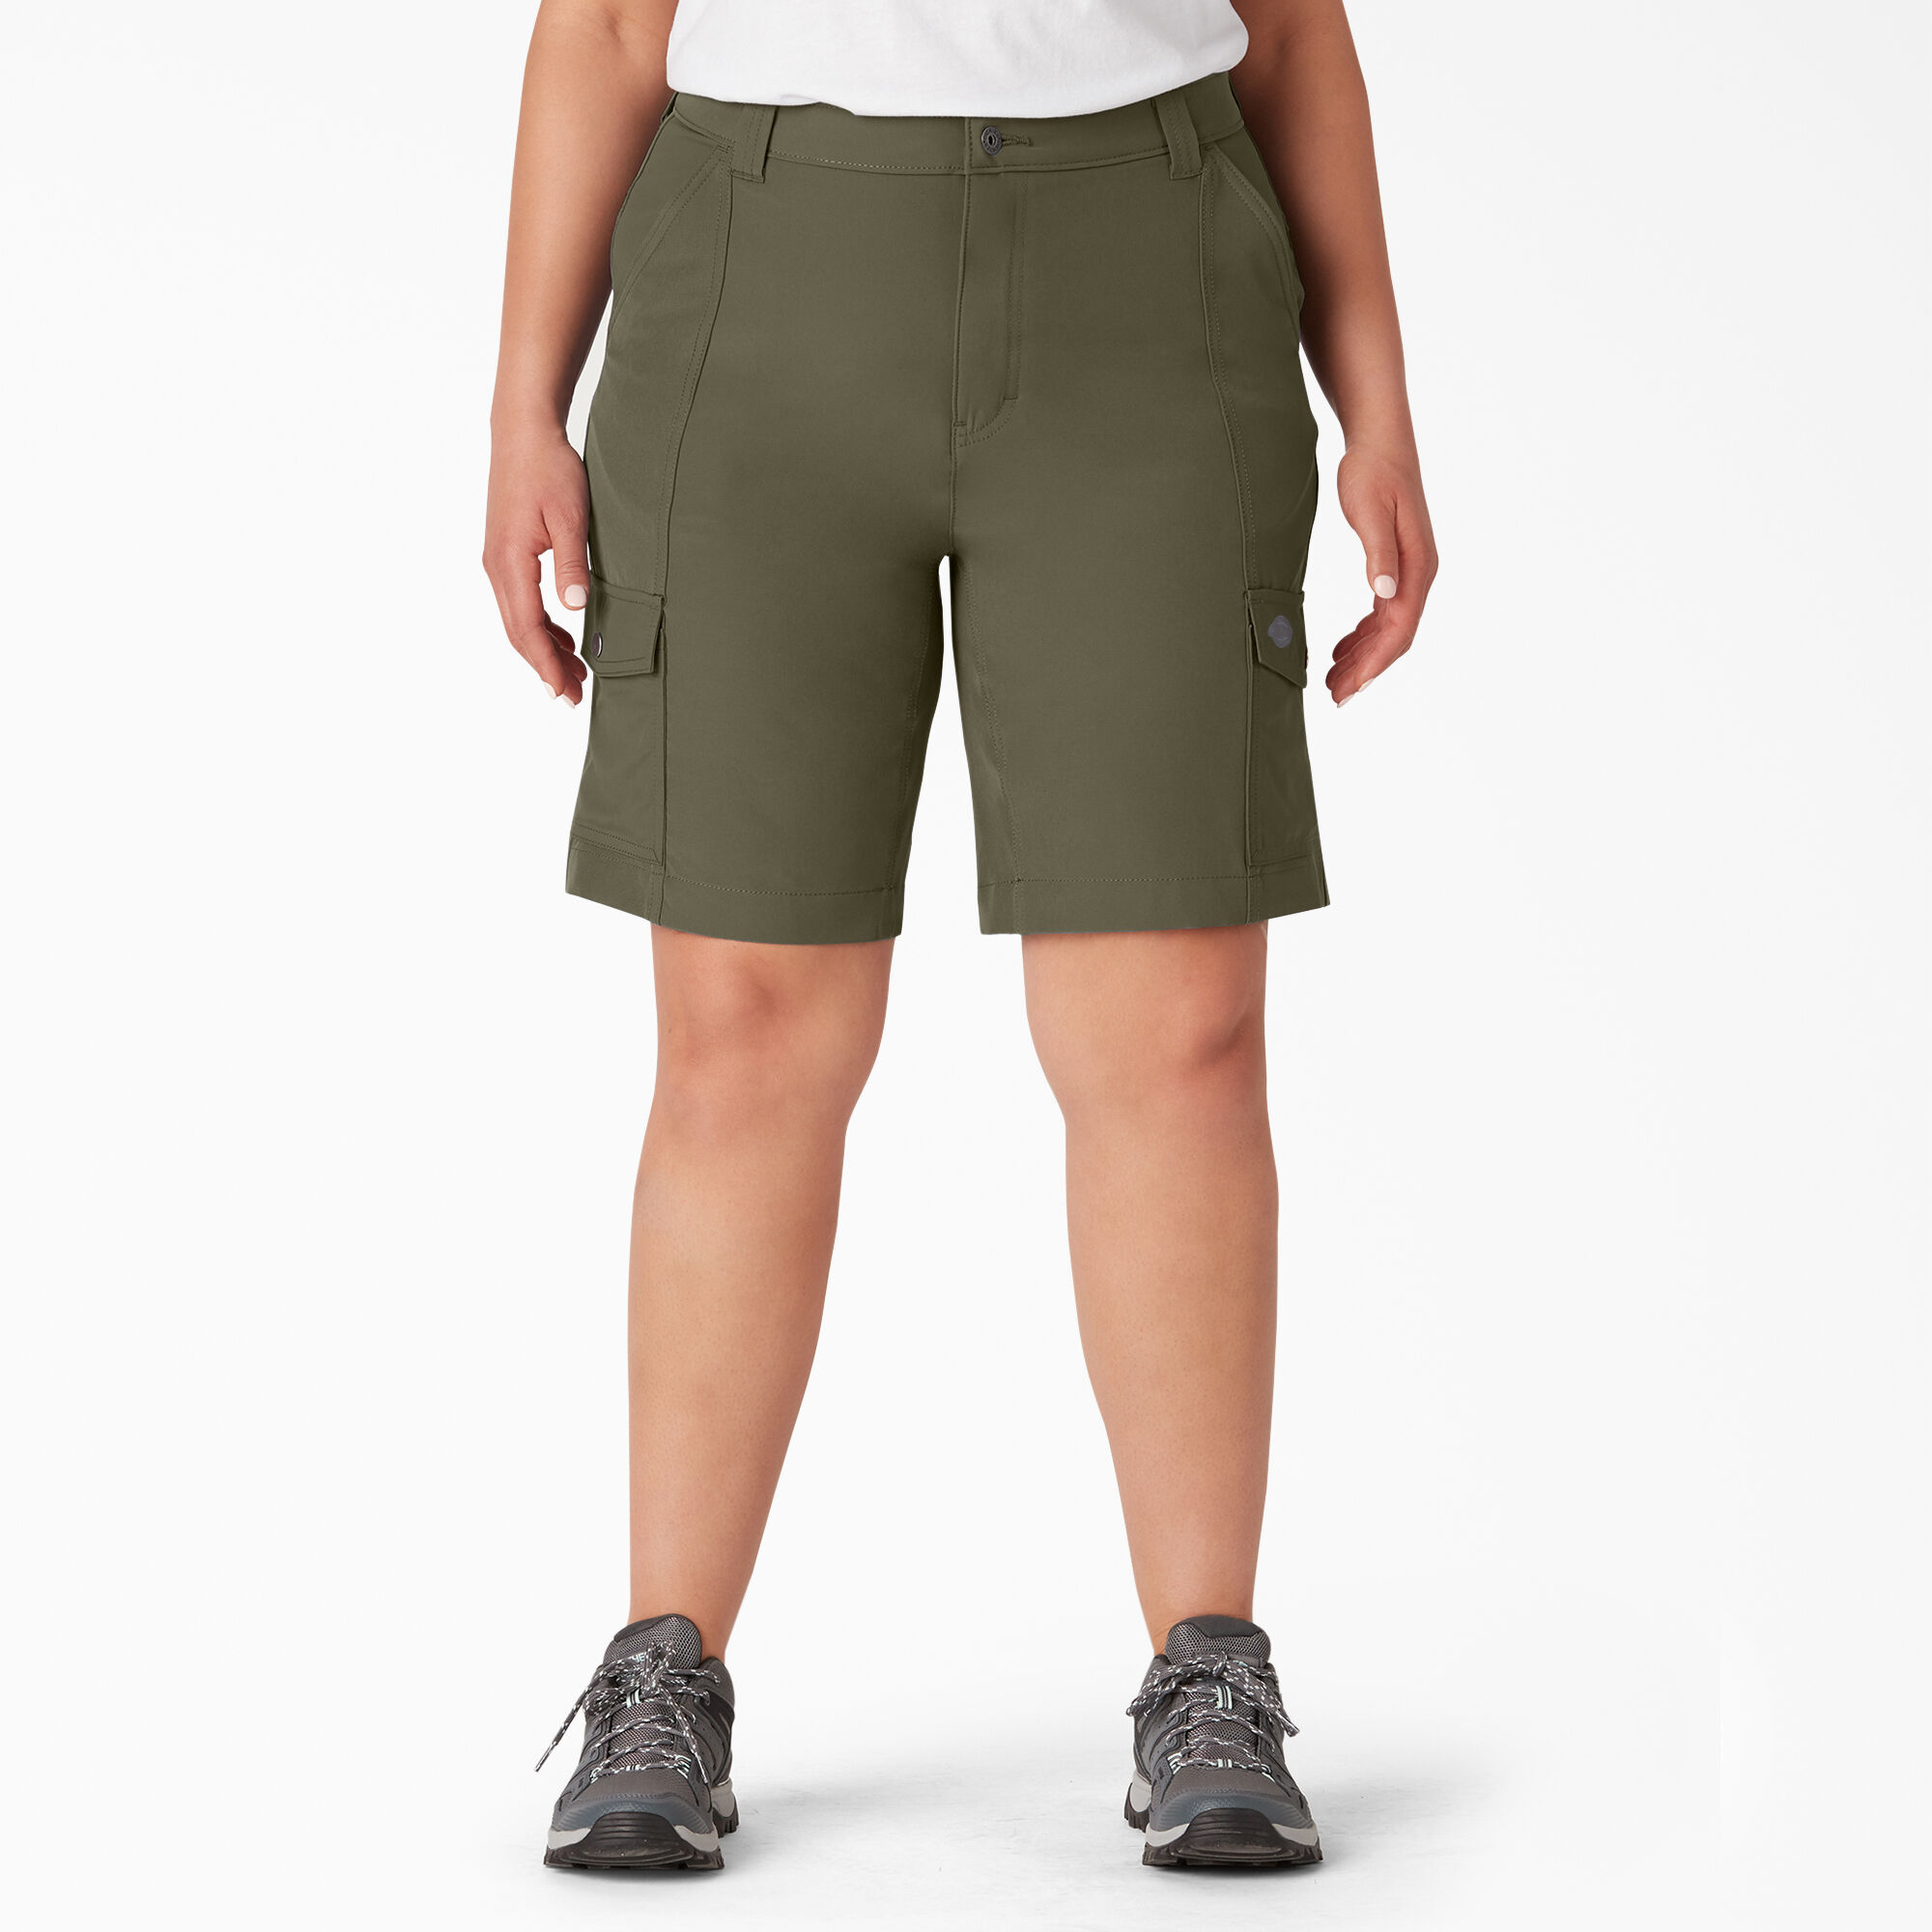 Women's Shorts - Work and Casual Shorts | Dickies